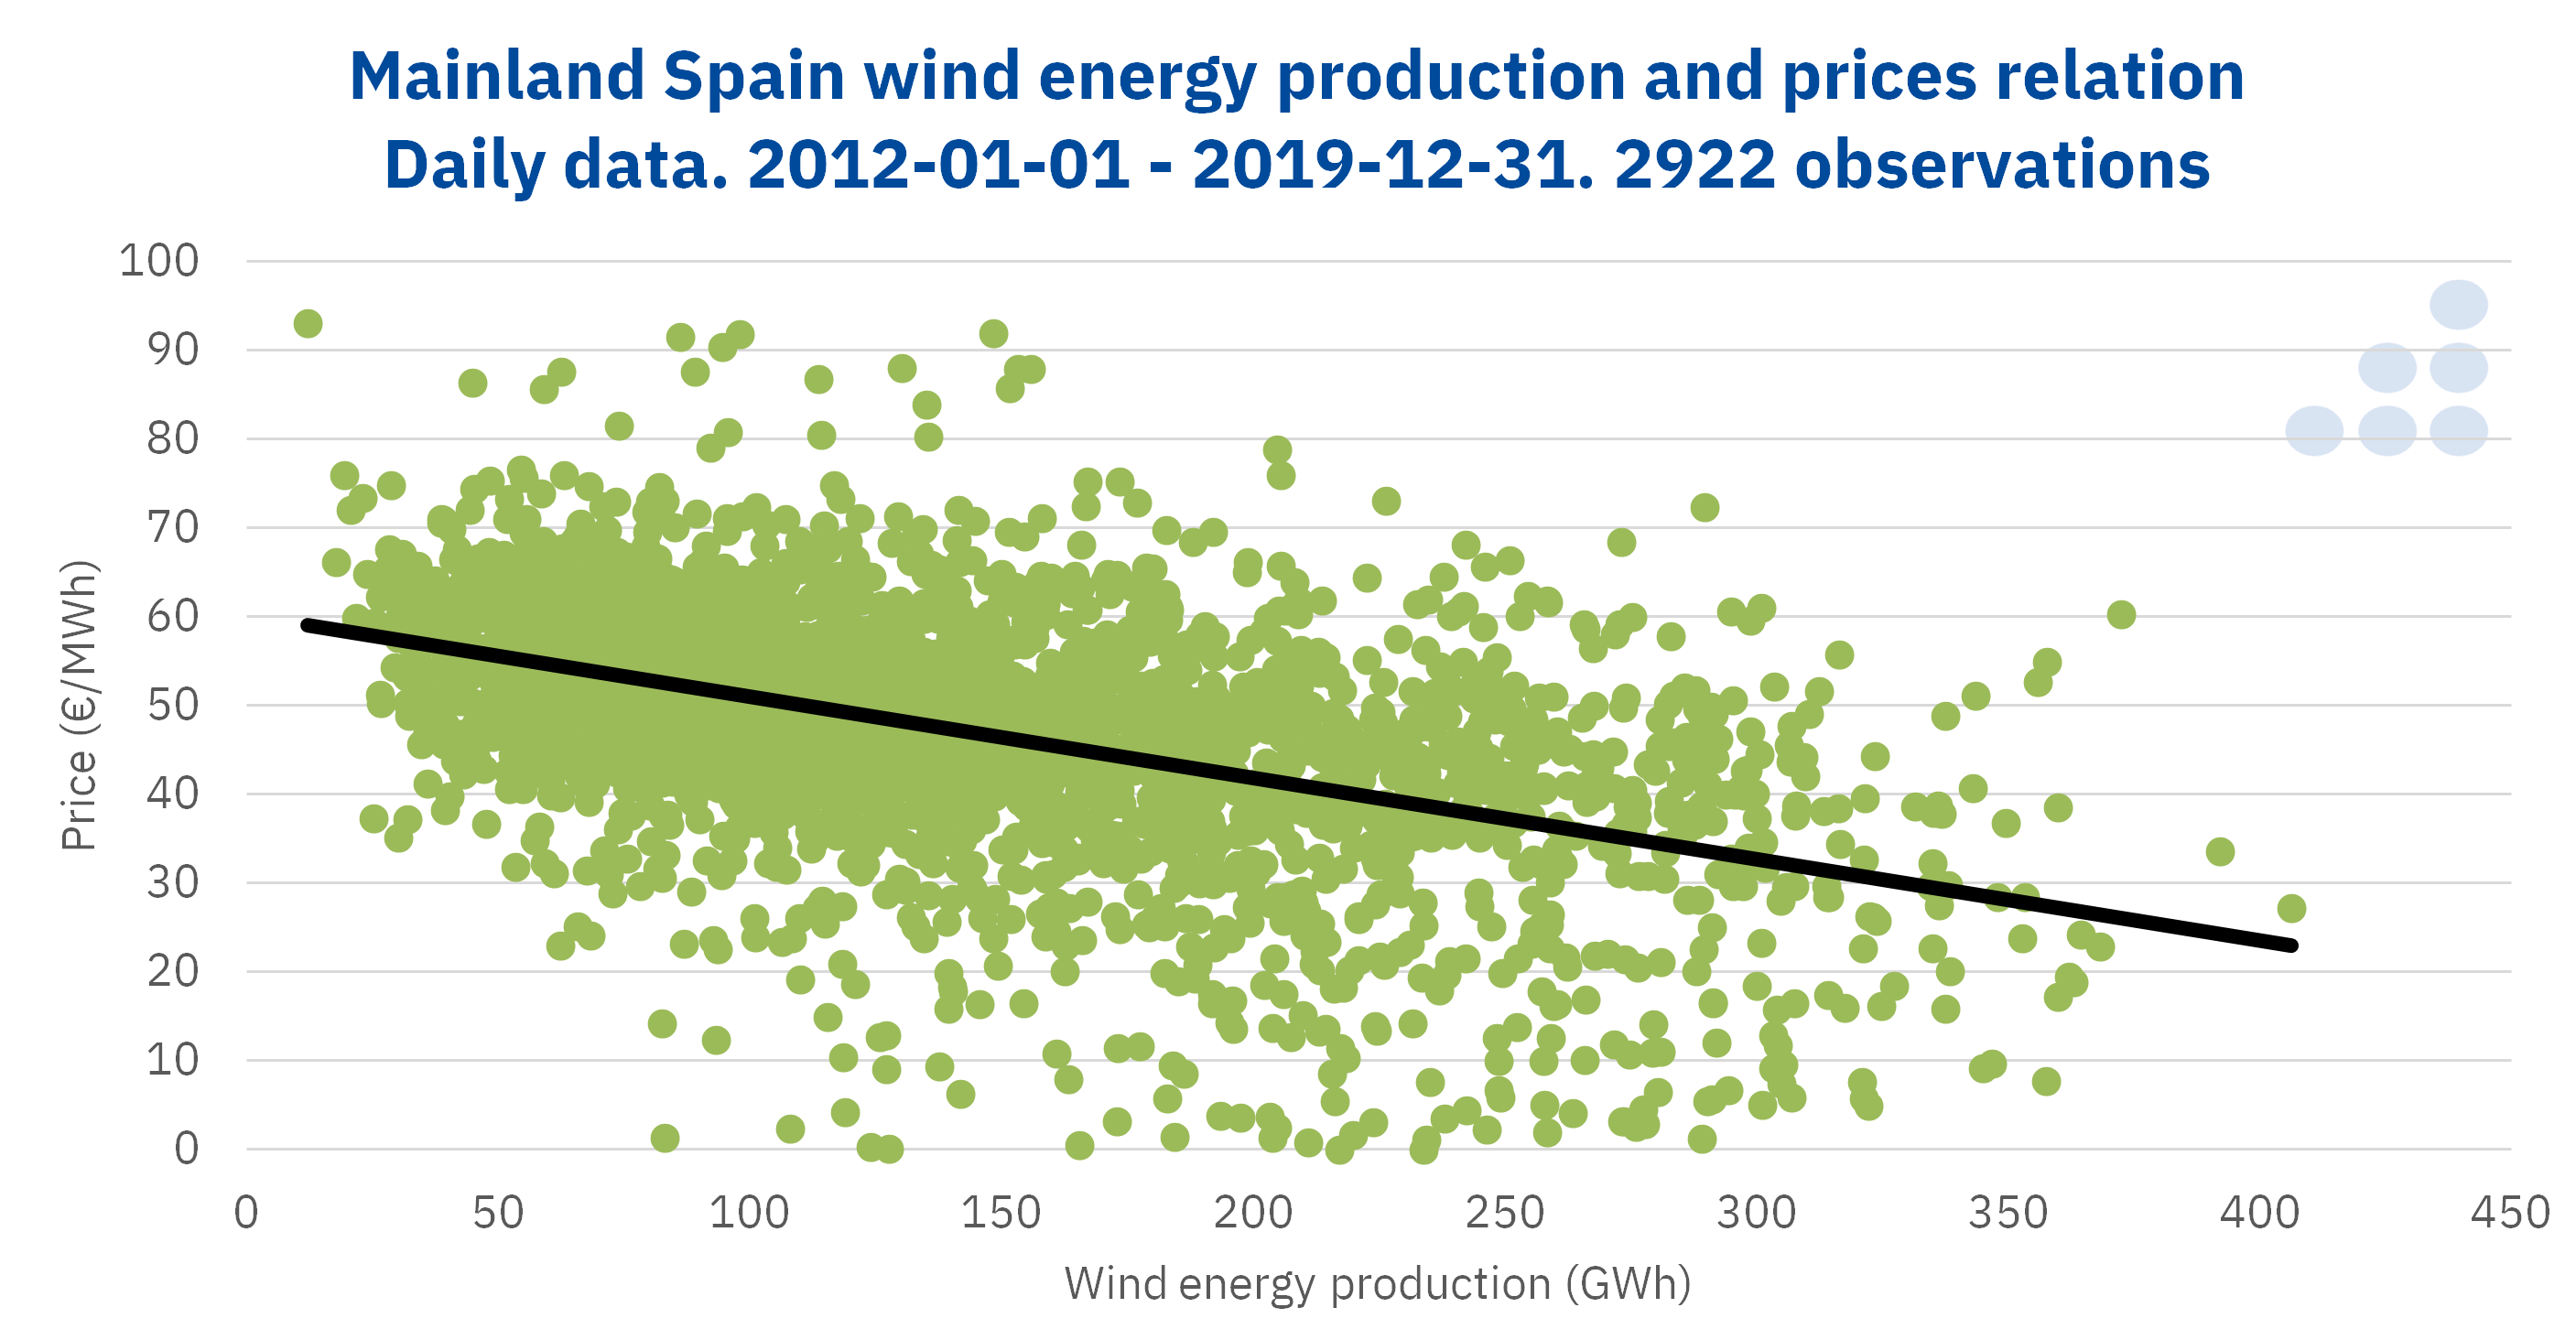 AleaSoft - Mainland spain wind energy production prices relation 2019